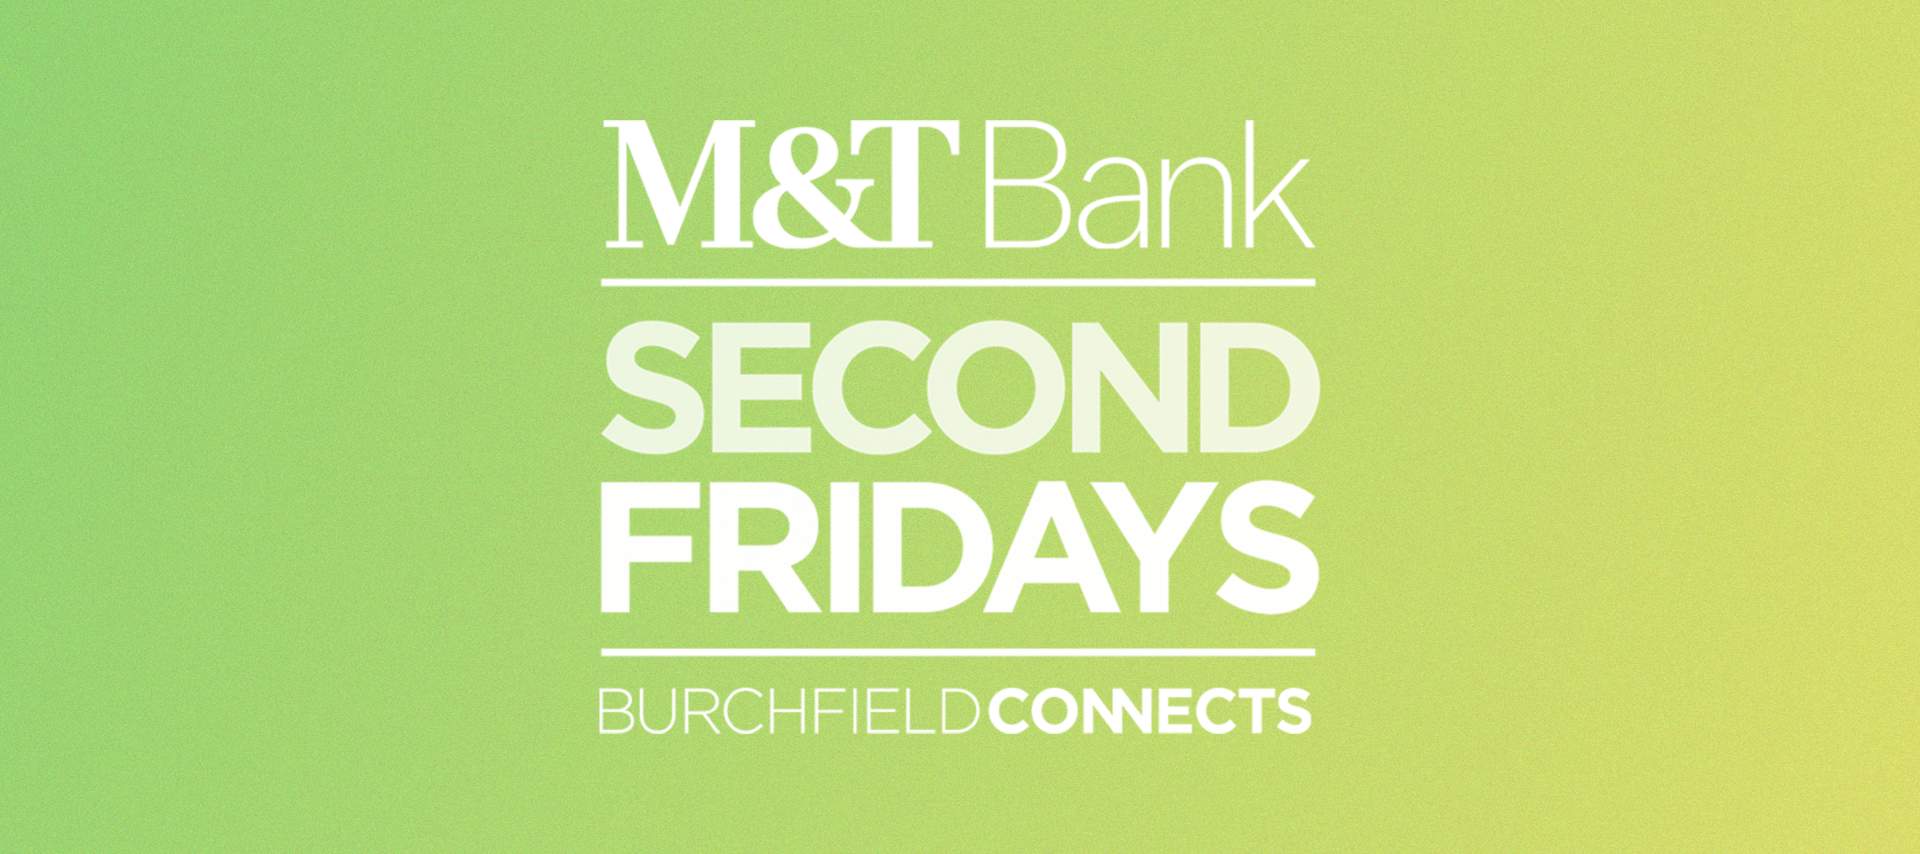 Second Friday Banner